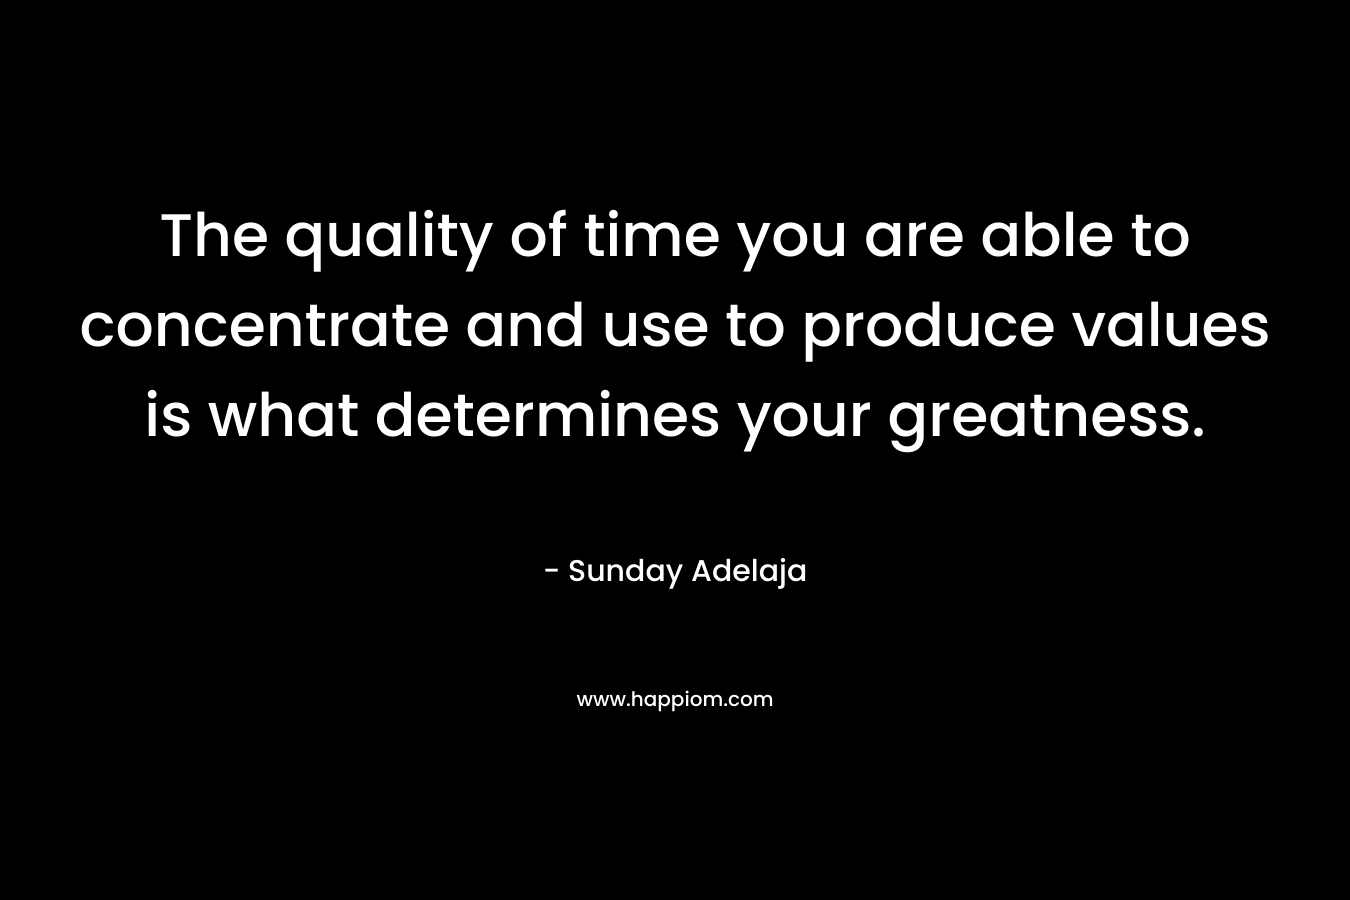 The quality of time you are able to concentrate and use to produce values is what determines your greatness.